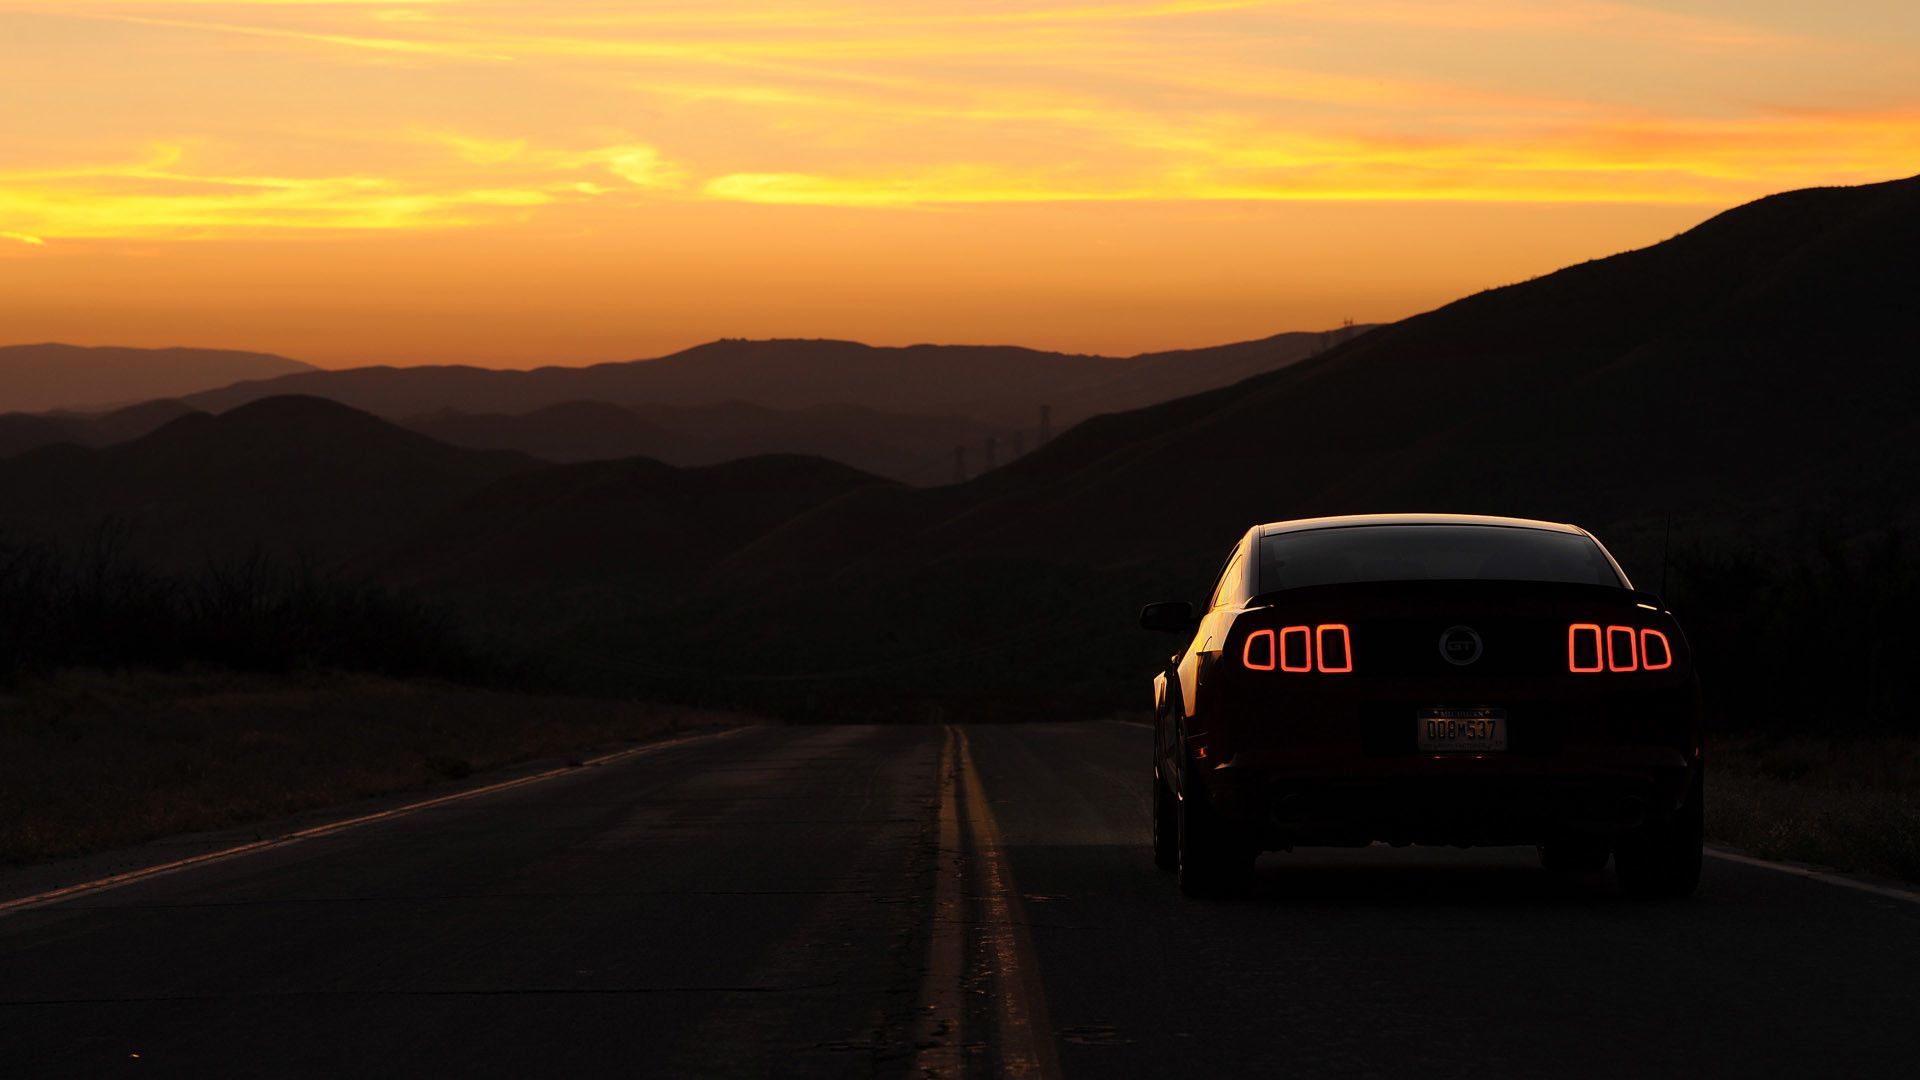 Res: 1920x Evening Drive Ford Mustang Wallpaper. Mustang wallpaper, Ford mustang wallpaper, Ford mustang